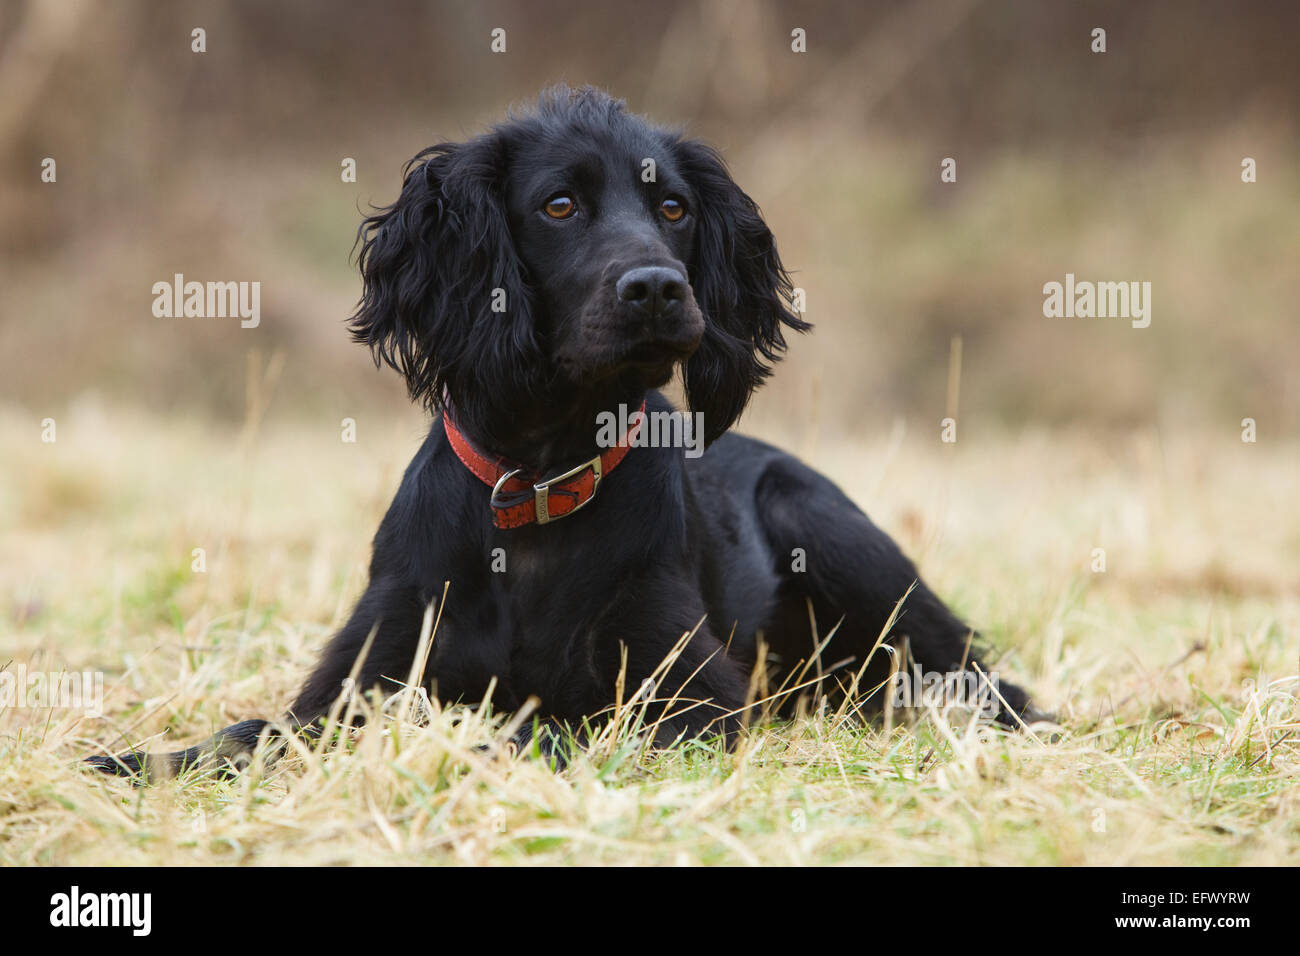 A black cocker spaniel dog laying down outside on grass. January 2015, UK. Stock Photo